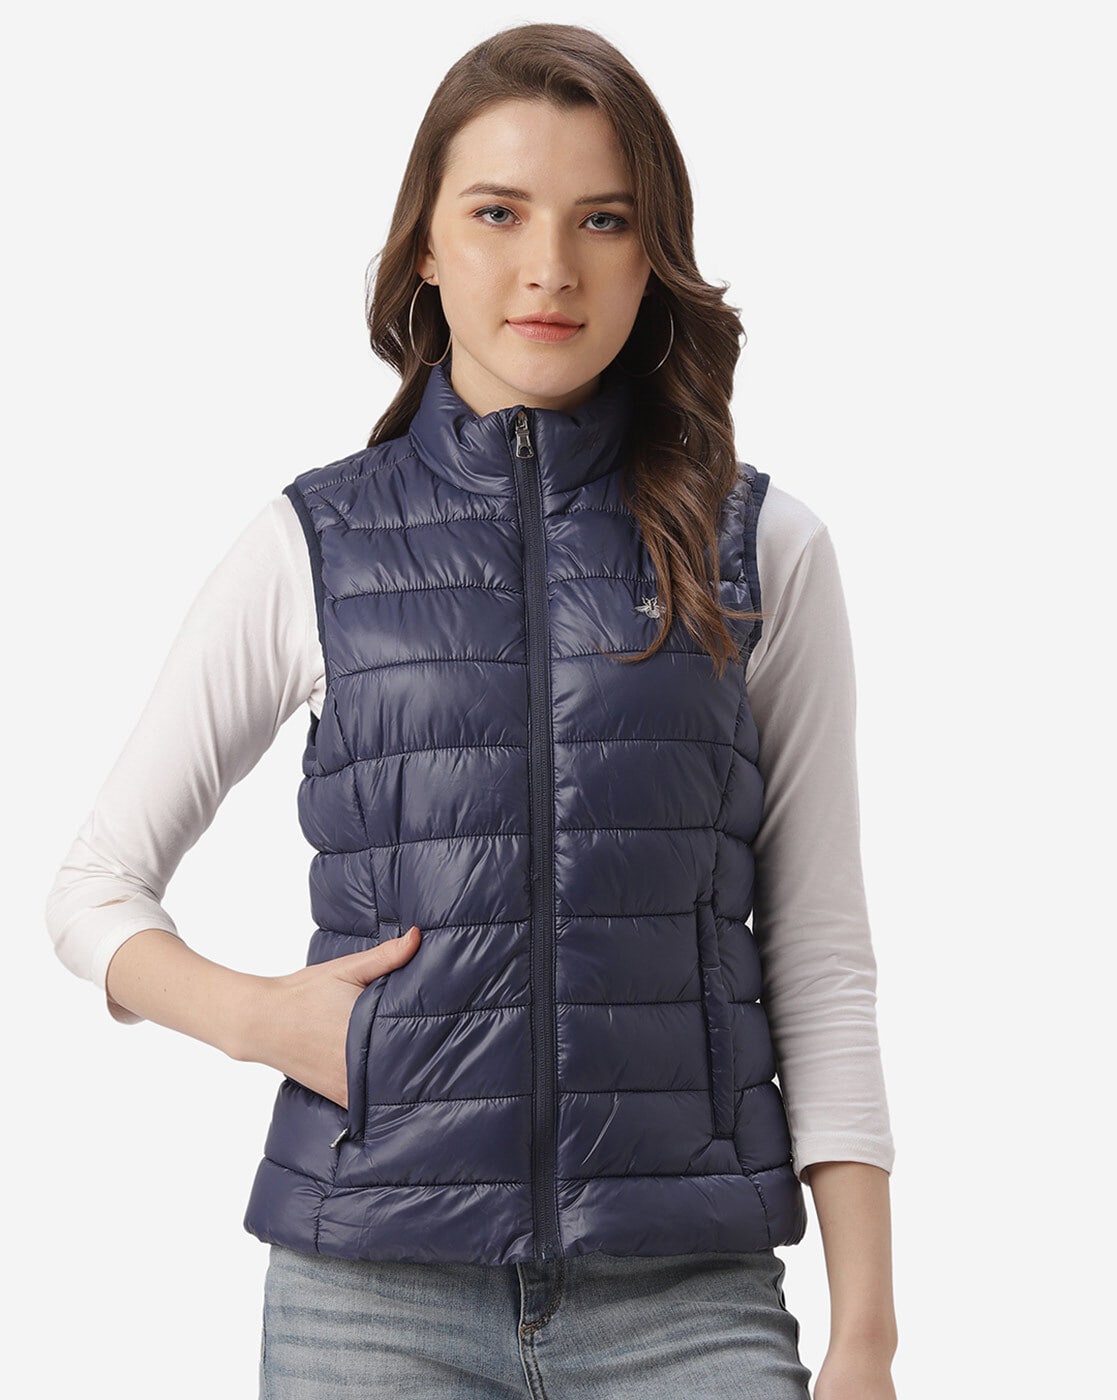 Red Tape Puffer jackets for Women sale - discounted price | FASHIOLA INDIA